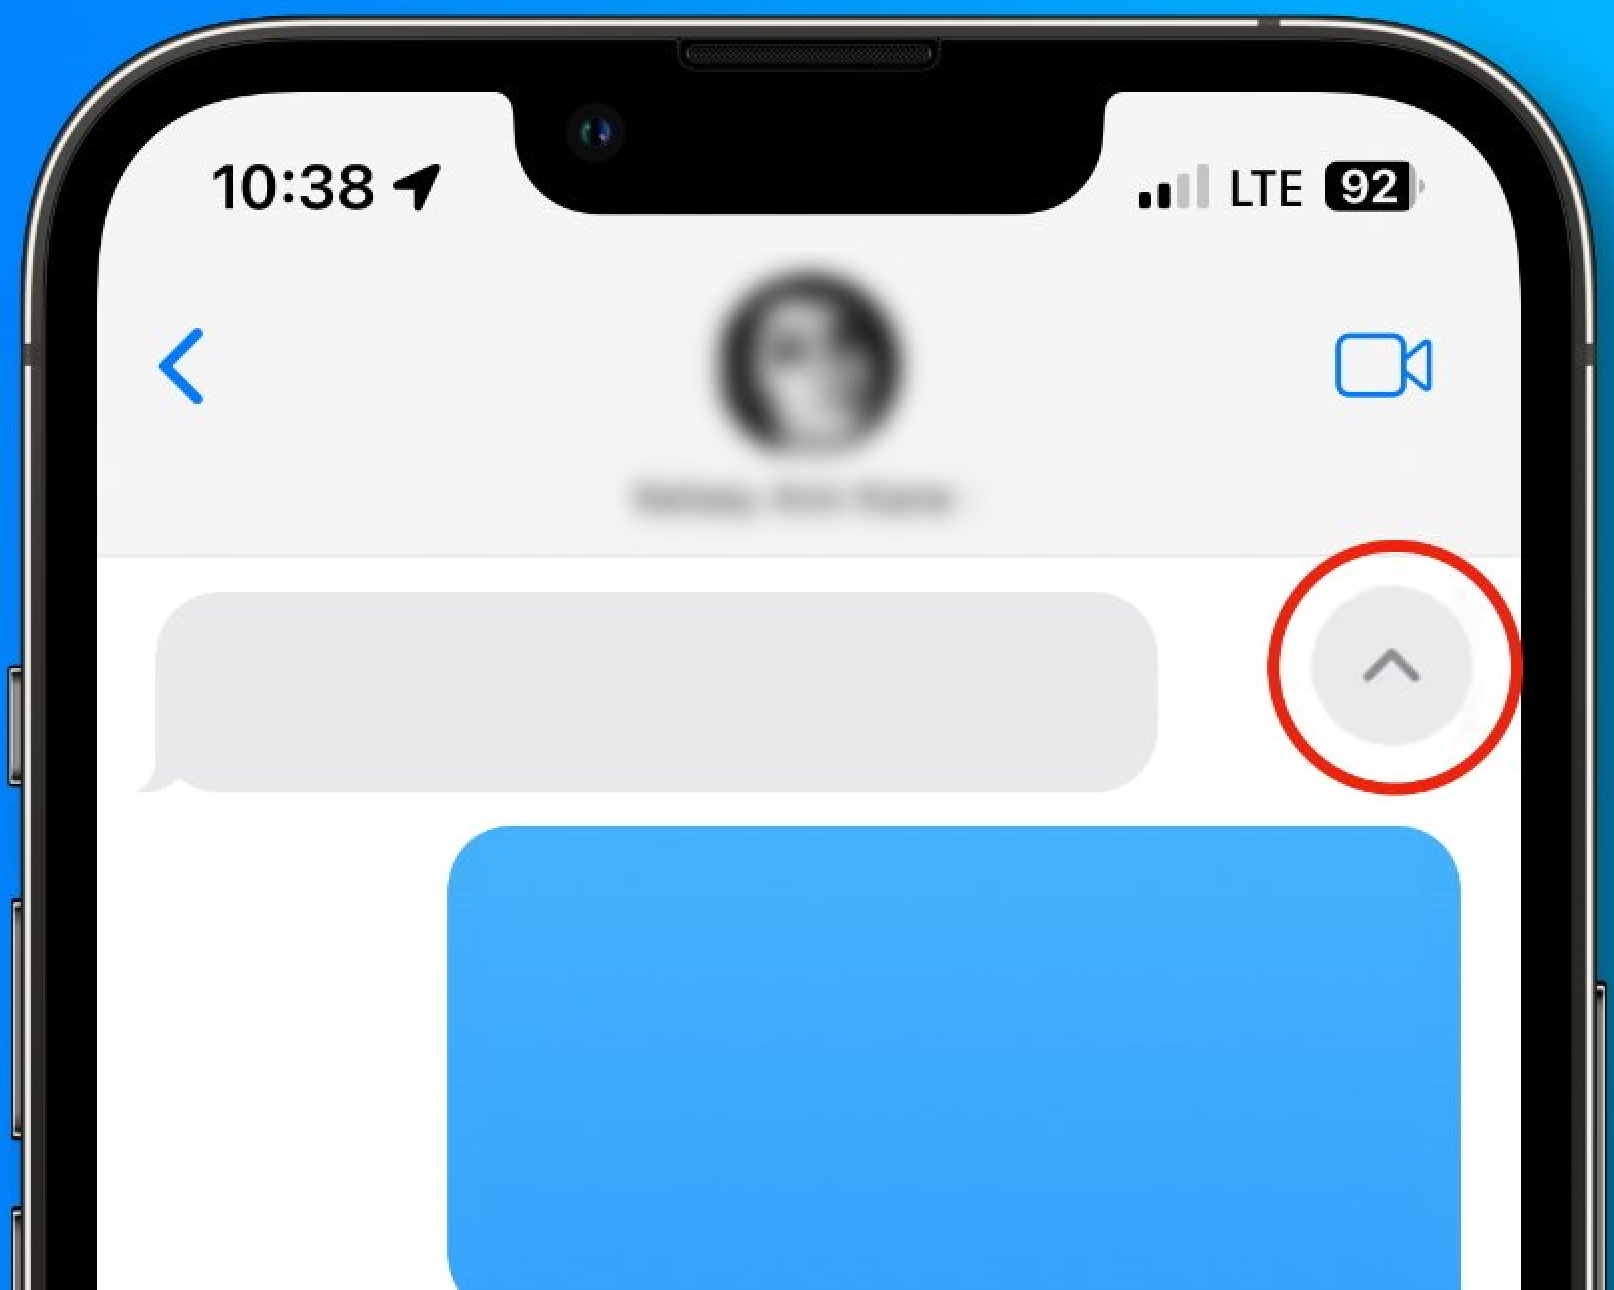 tap on the arrow to jump to where the messages start